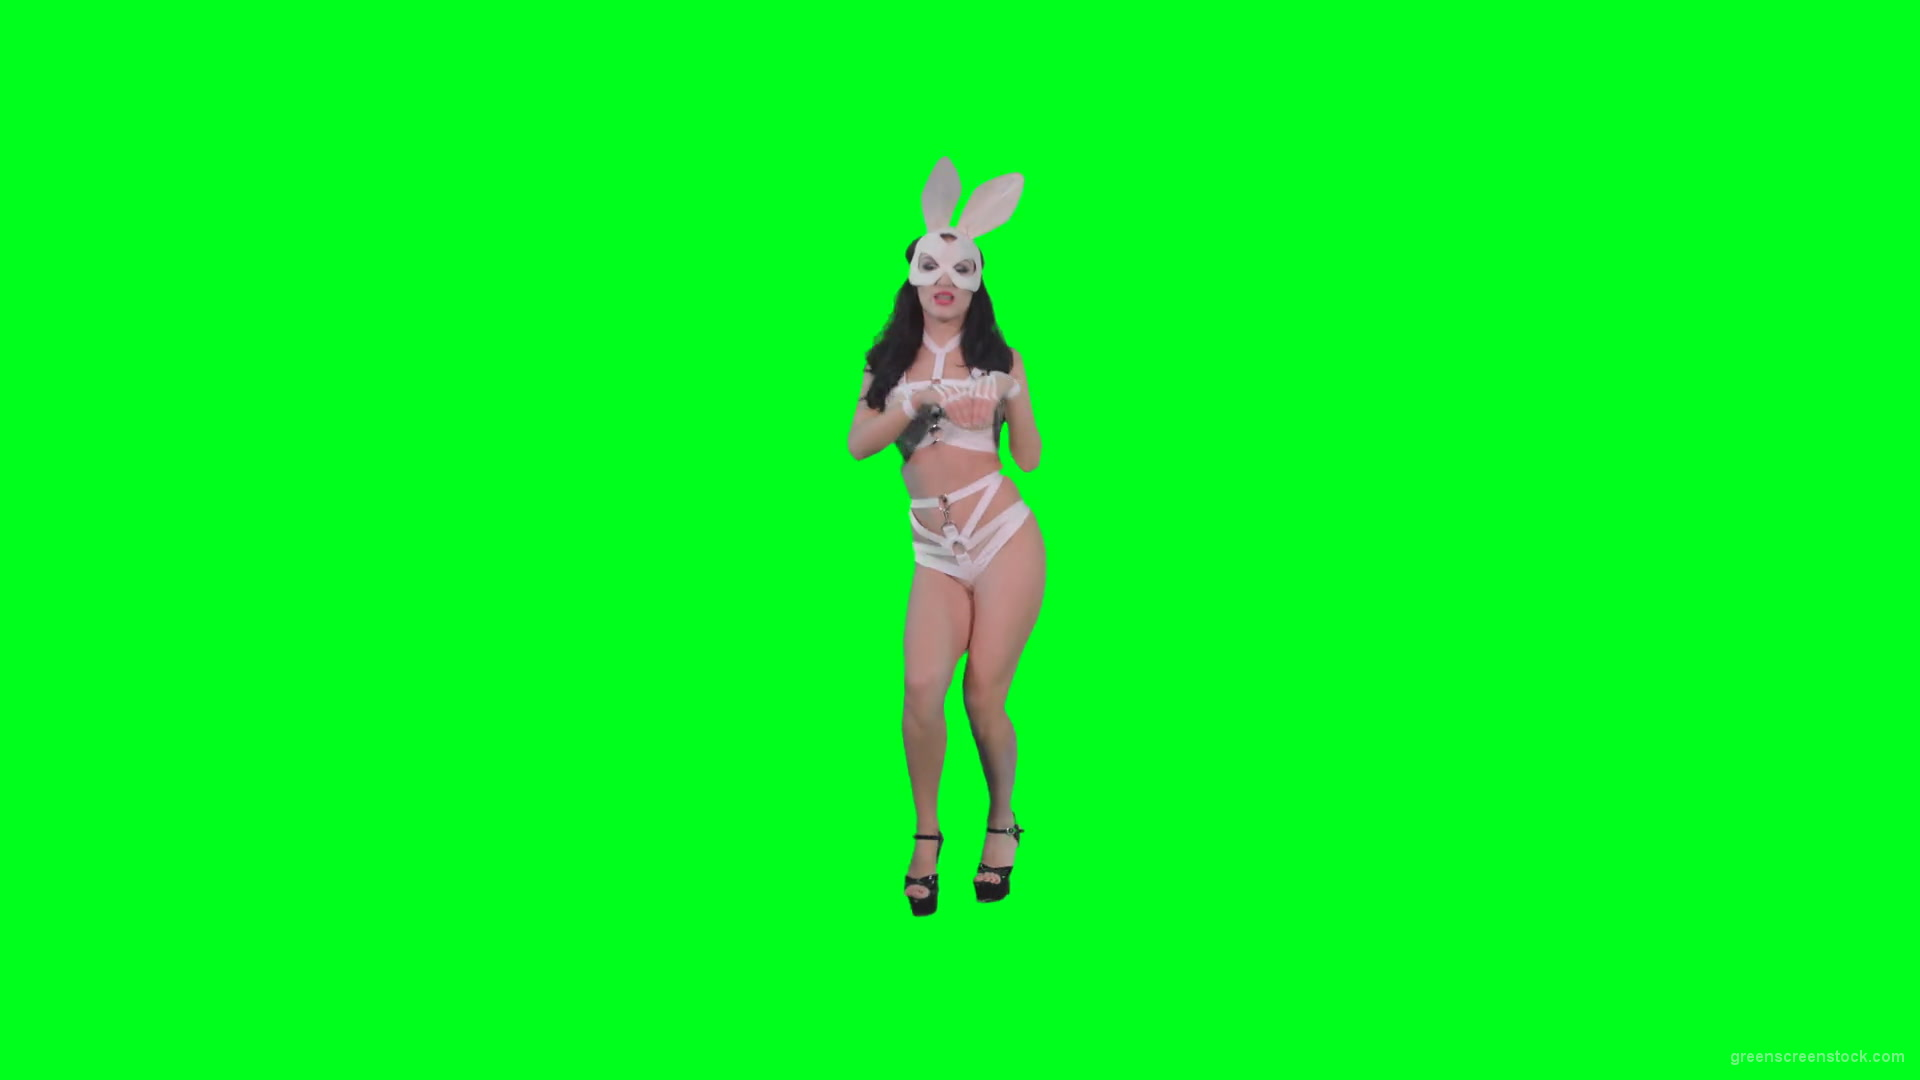 Sexy-woman-jumping-in-Go-Go-style-in-rabbit-mask-on-green-screen-4K-Video-Footage-1920_007 Green Screen Stock